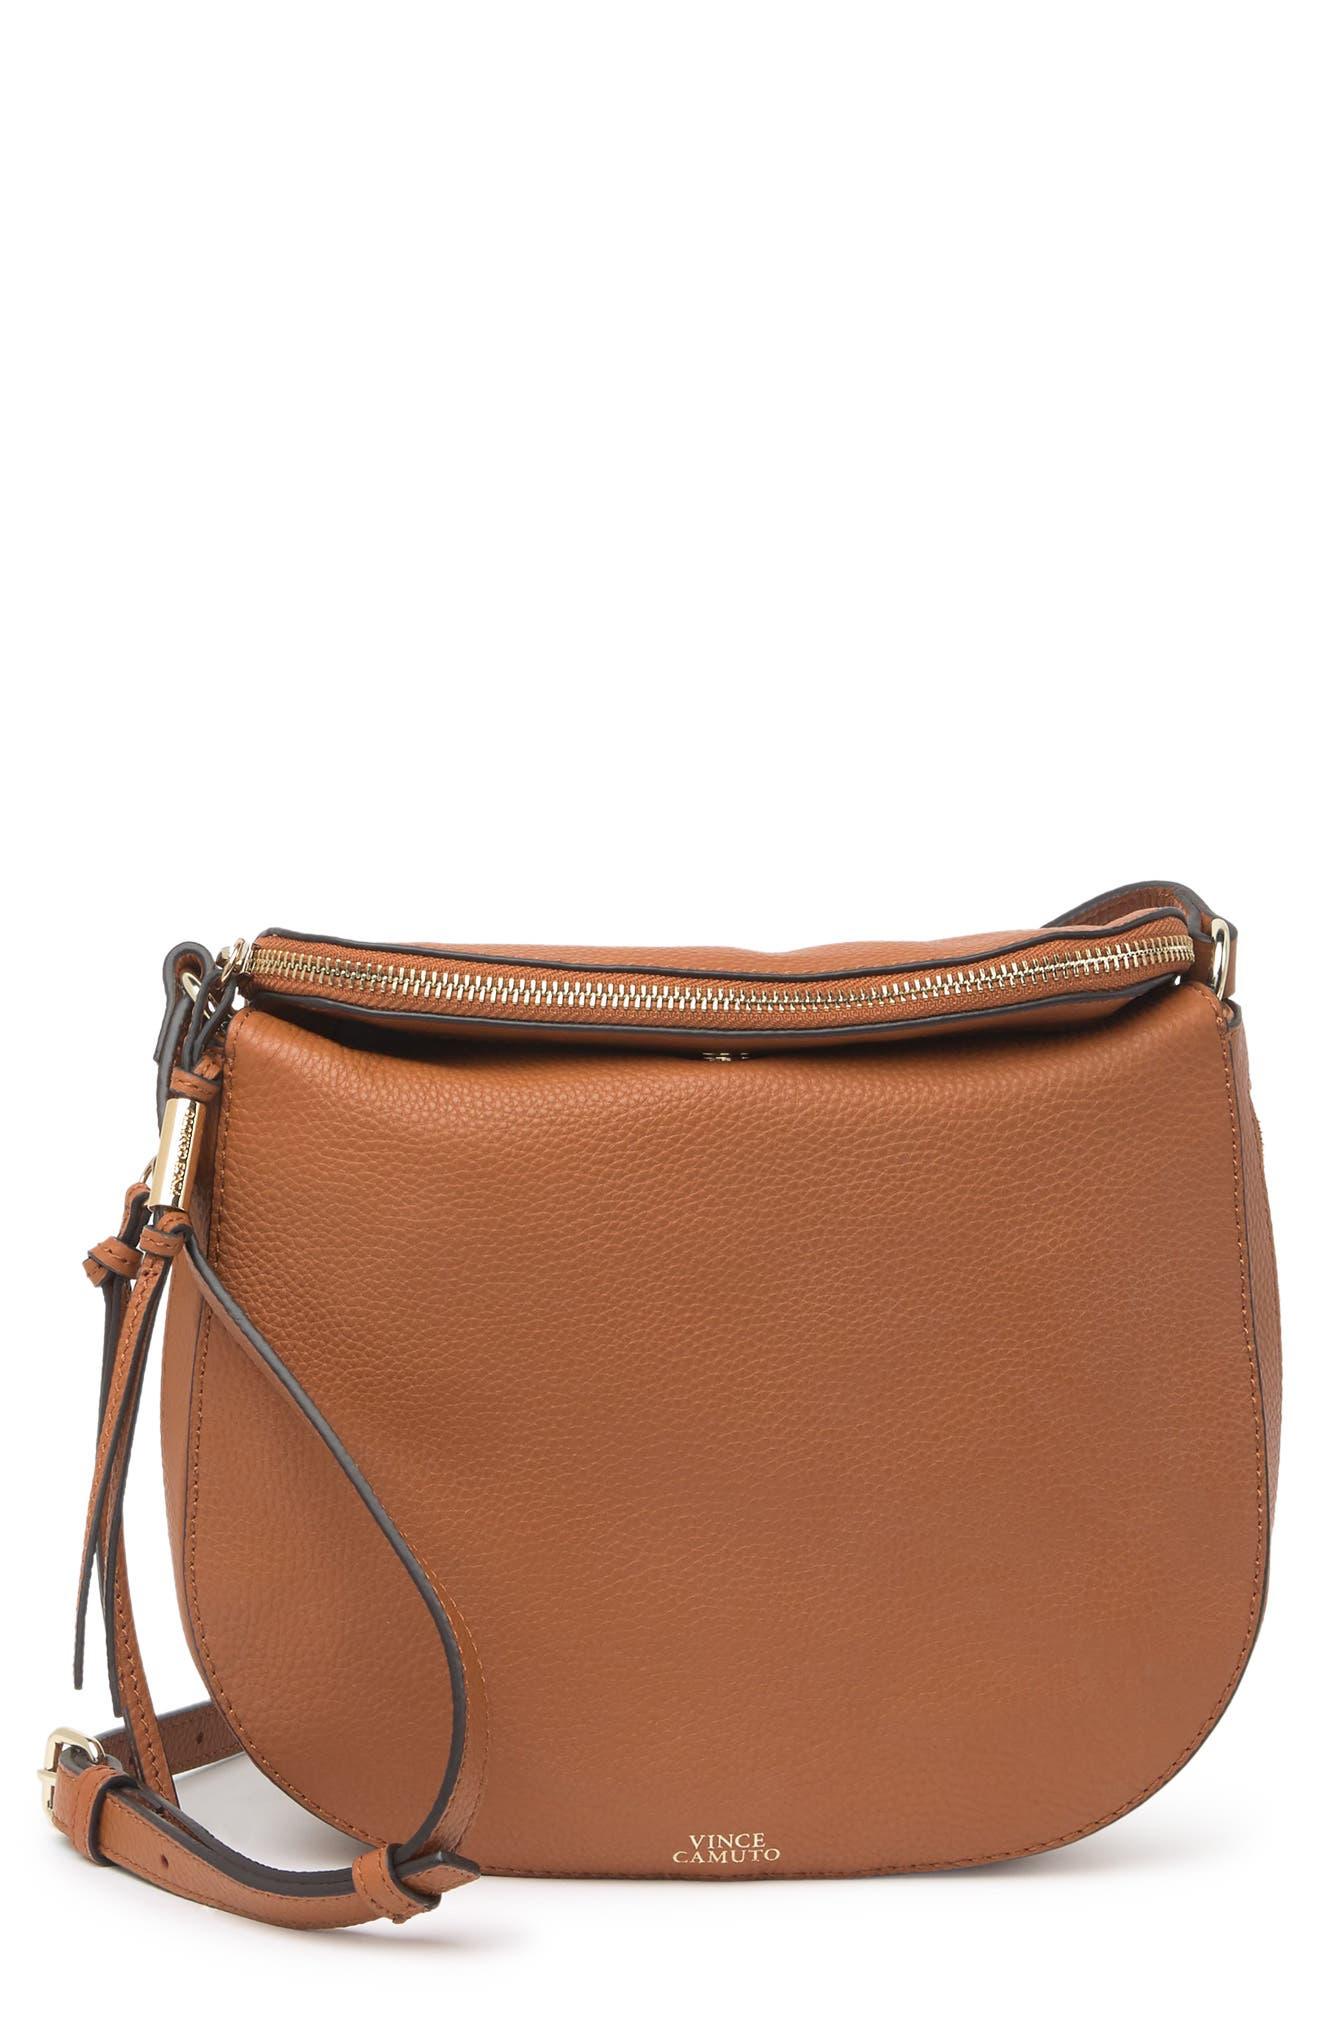 Vince Camuto Kenzy Large Leather Crossbody Bag In Caramel Crisp At Nordstrom  Rack in Brown | Lyst